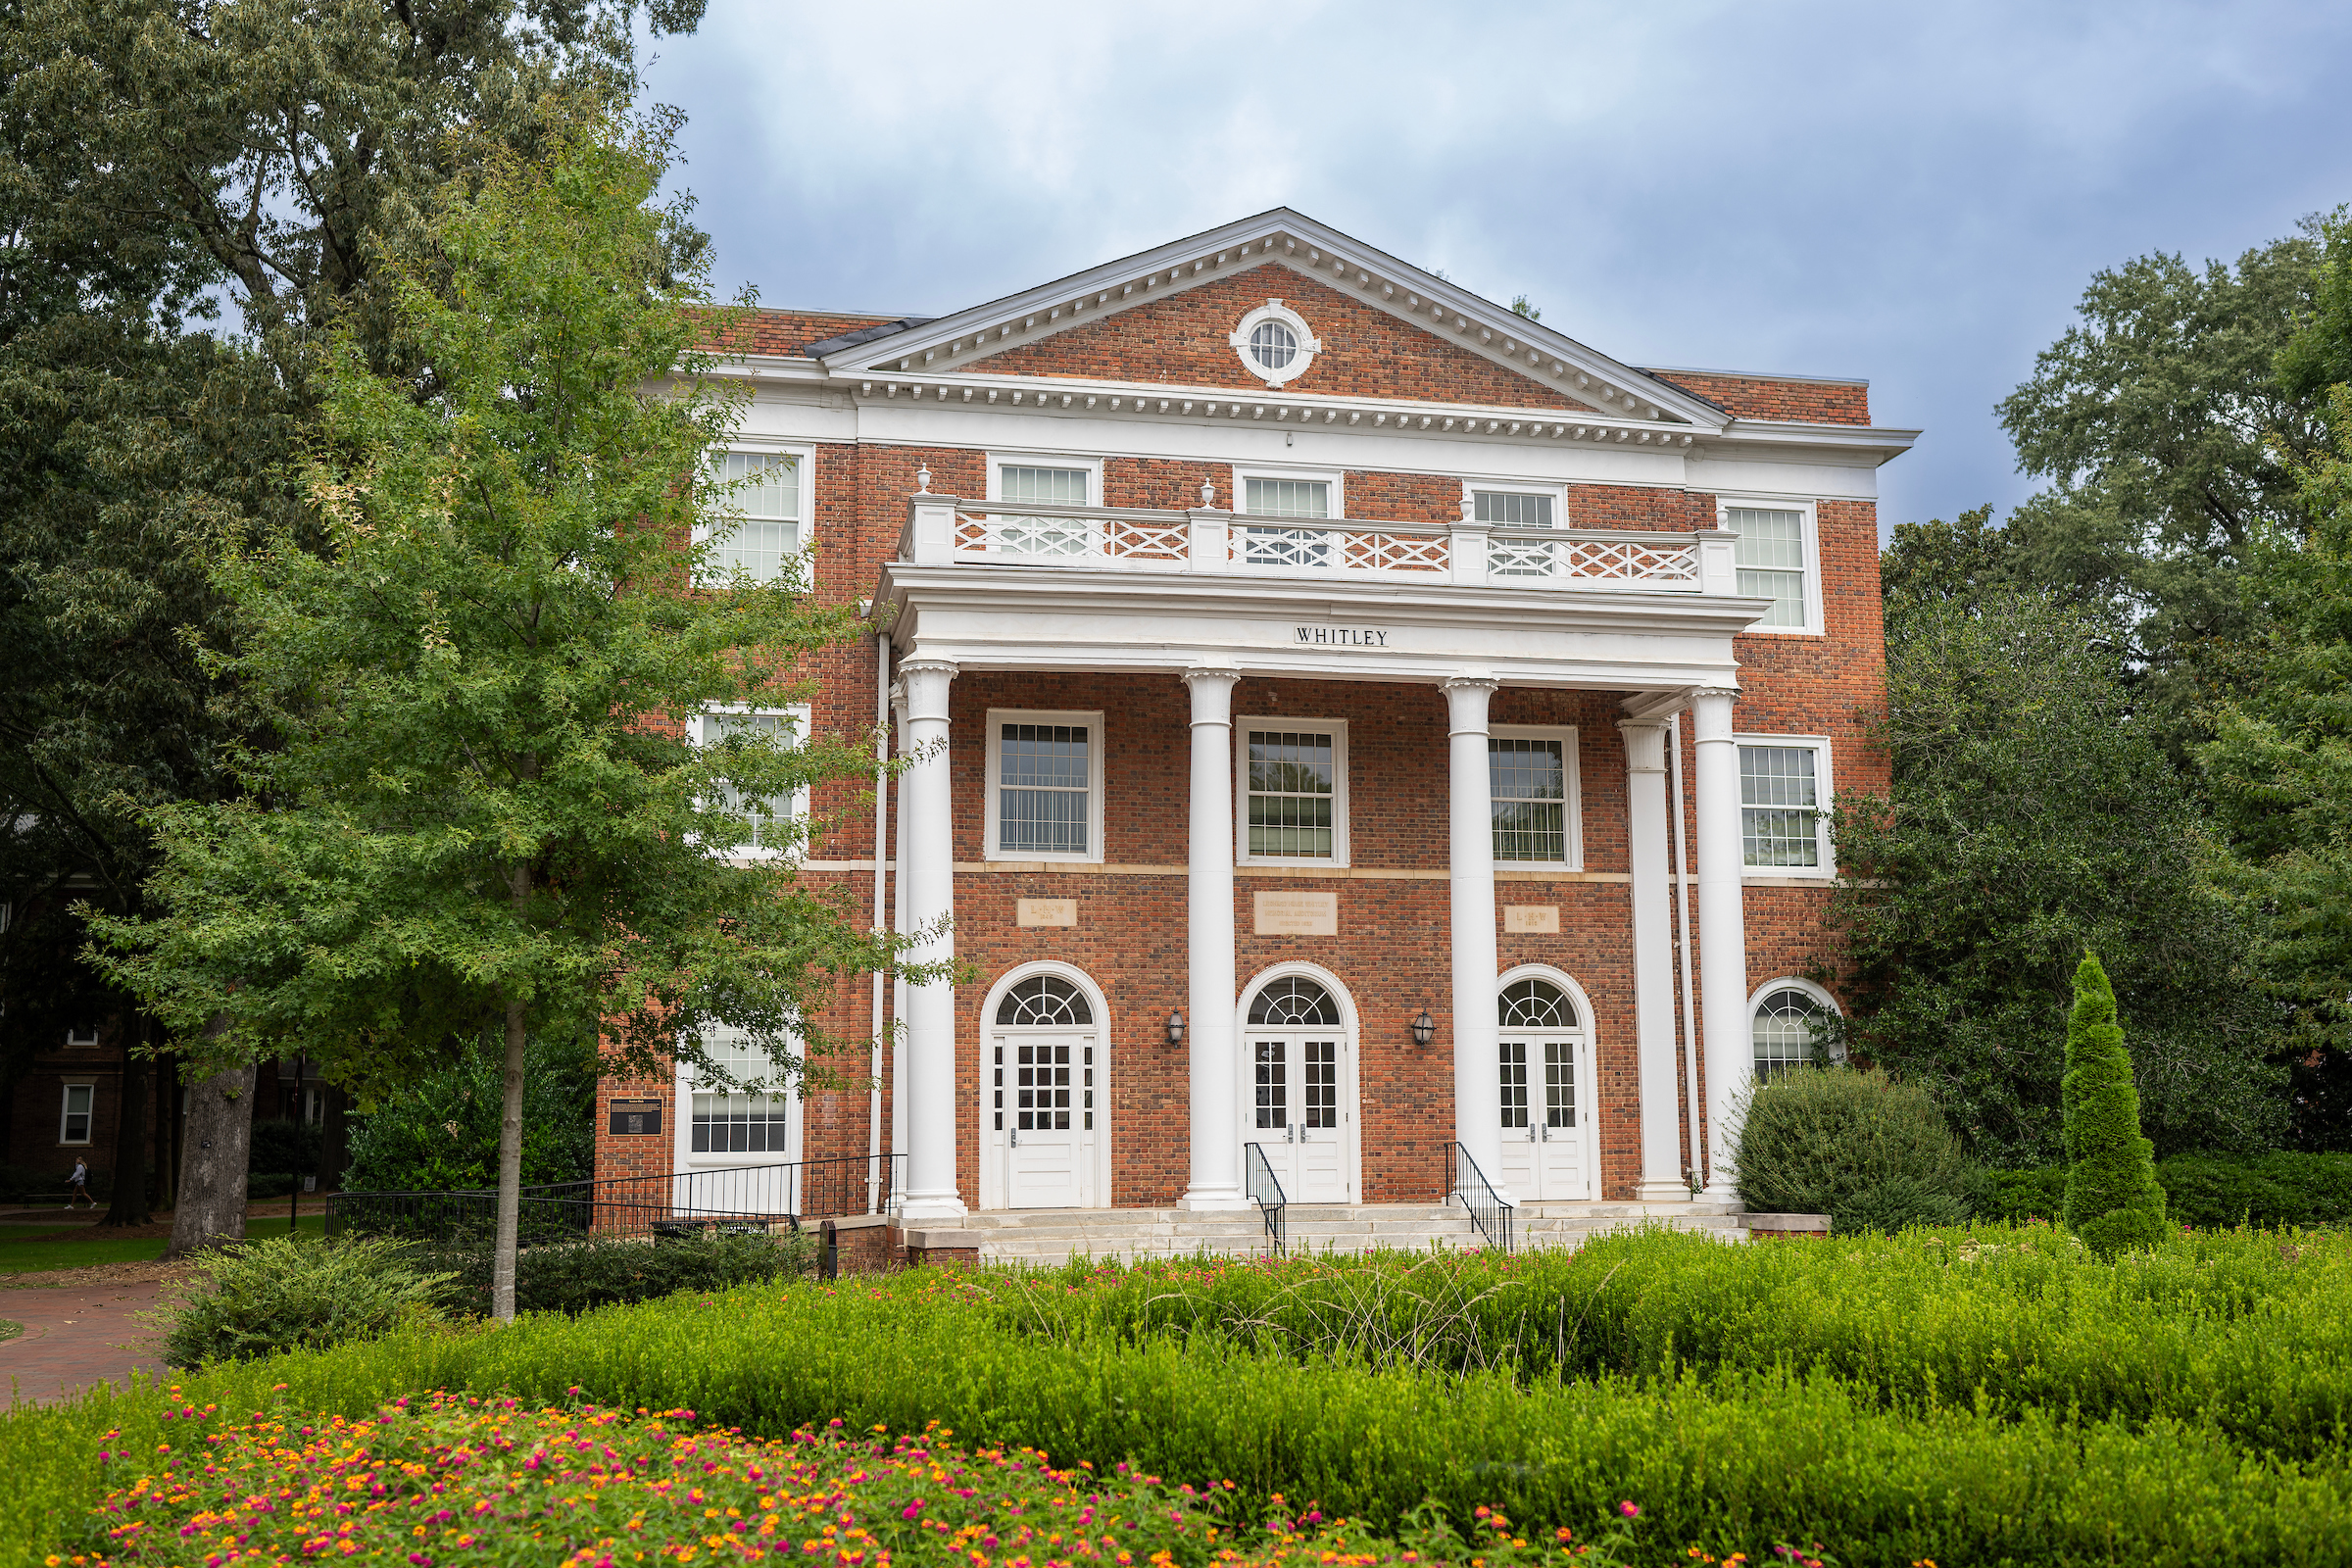 From the archives: Whitley Hall celebrates 100 years of music and memories |  Today in Elon